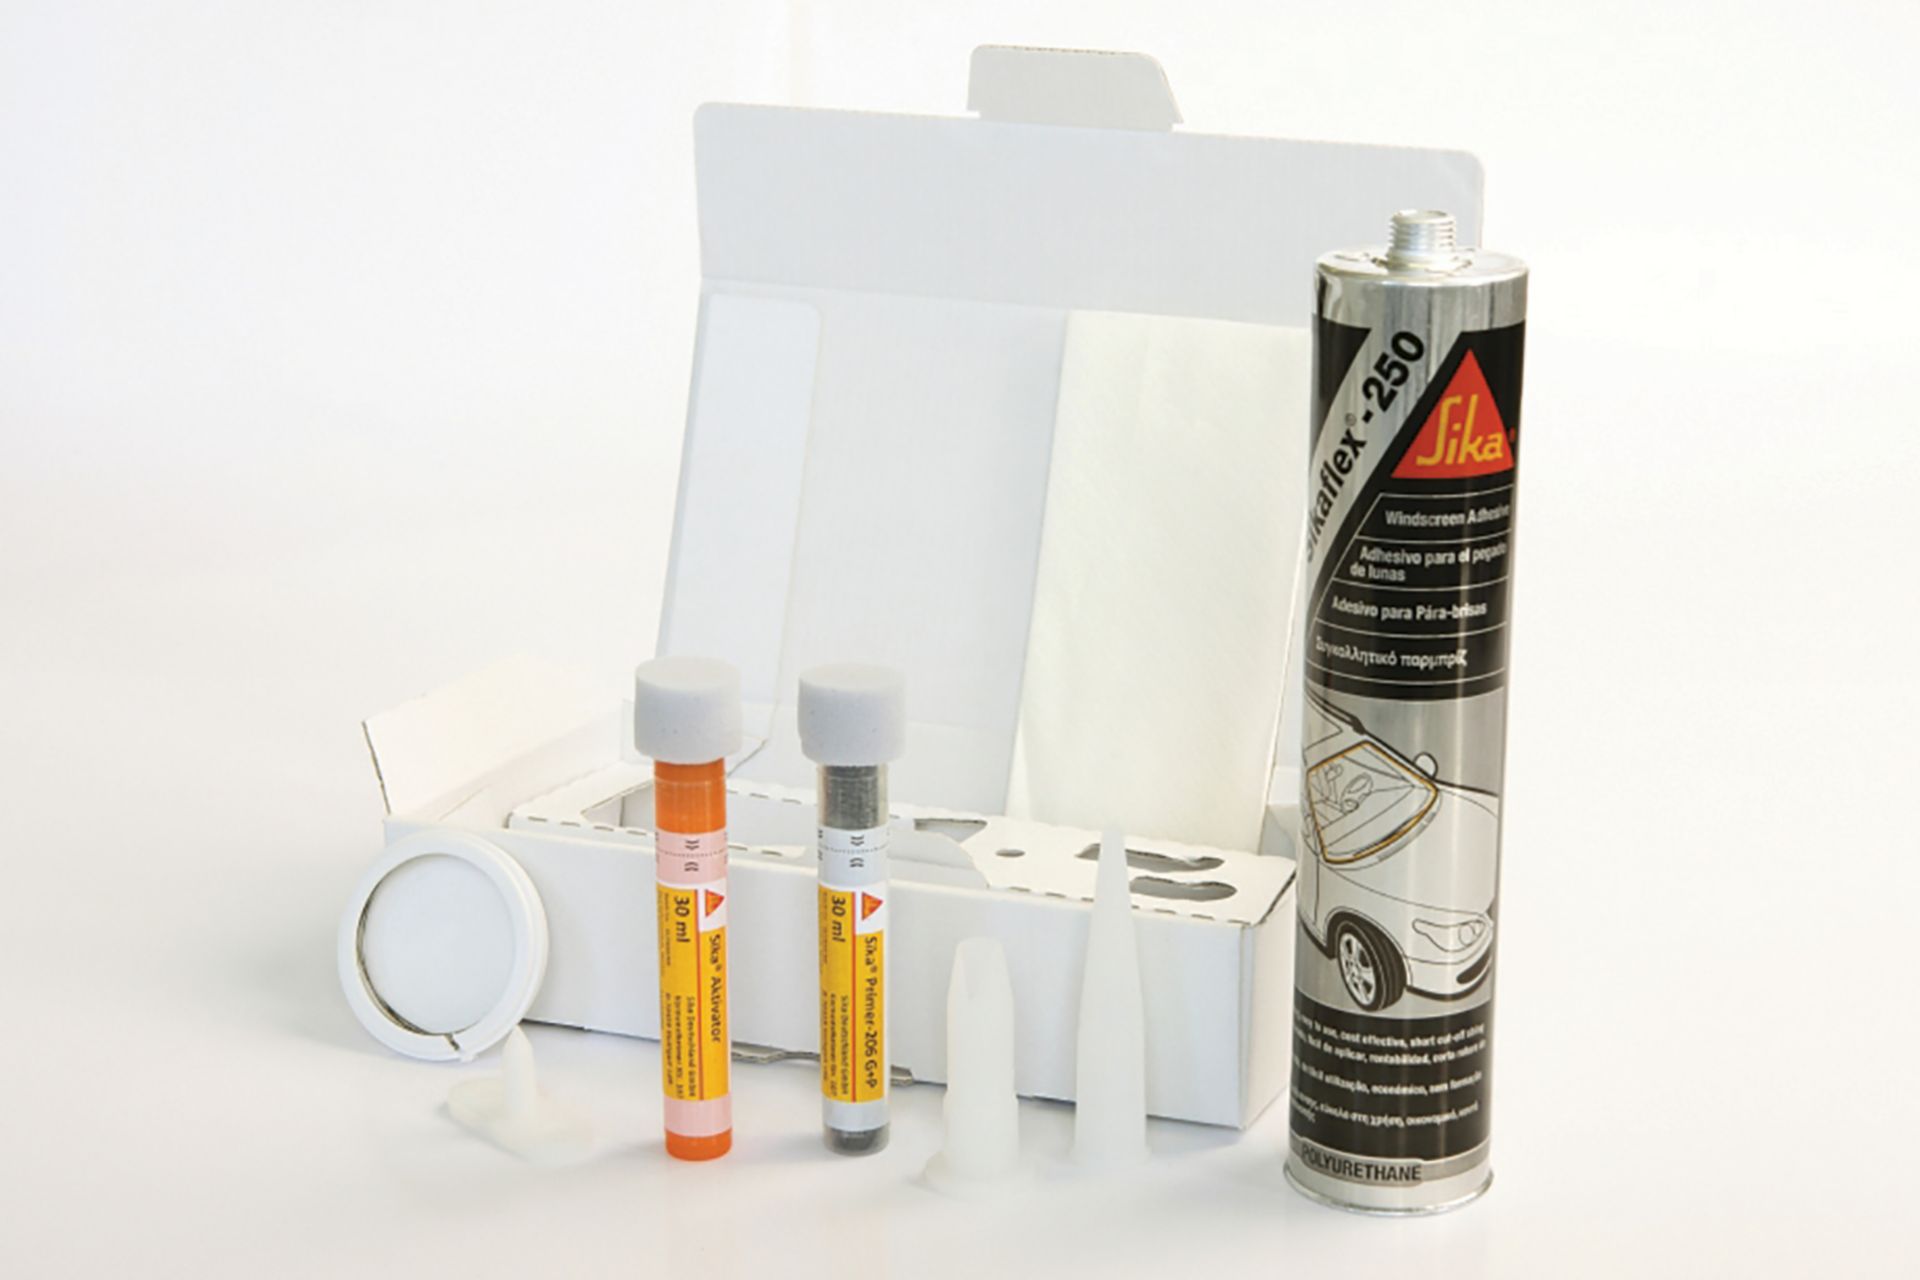 Image of Sika Premium Autoglass replacement kit including Sikaflex Adhesive, pretreatment’s, and nozzles